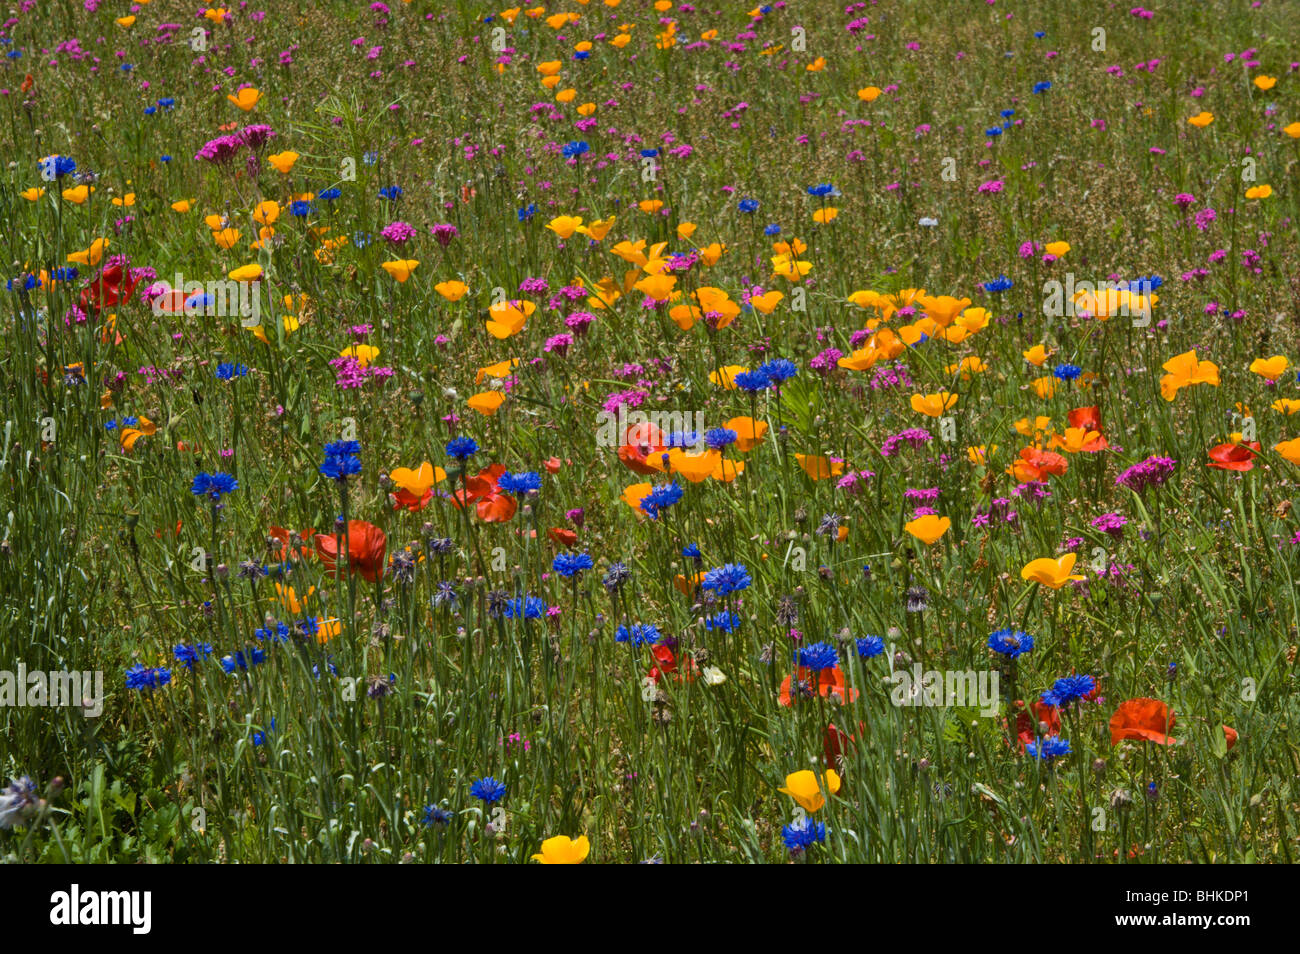 Bachelors Buttons, Poppies, and other wildflowers along a highway in eastern North Carolina Stock Photo